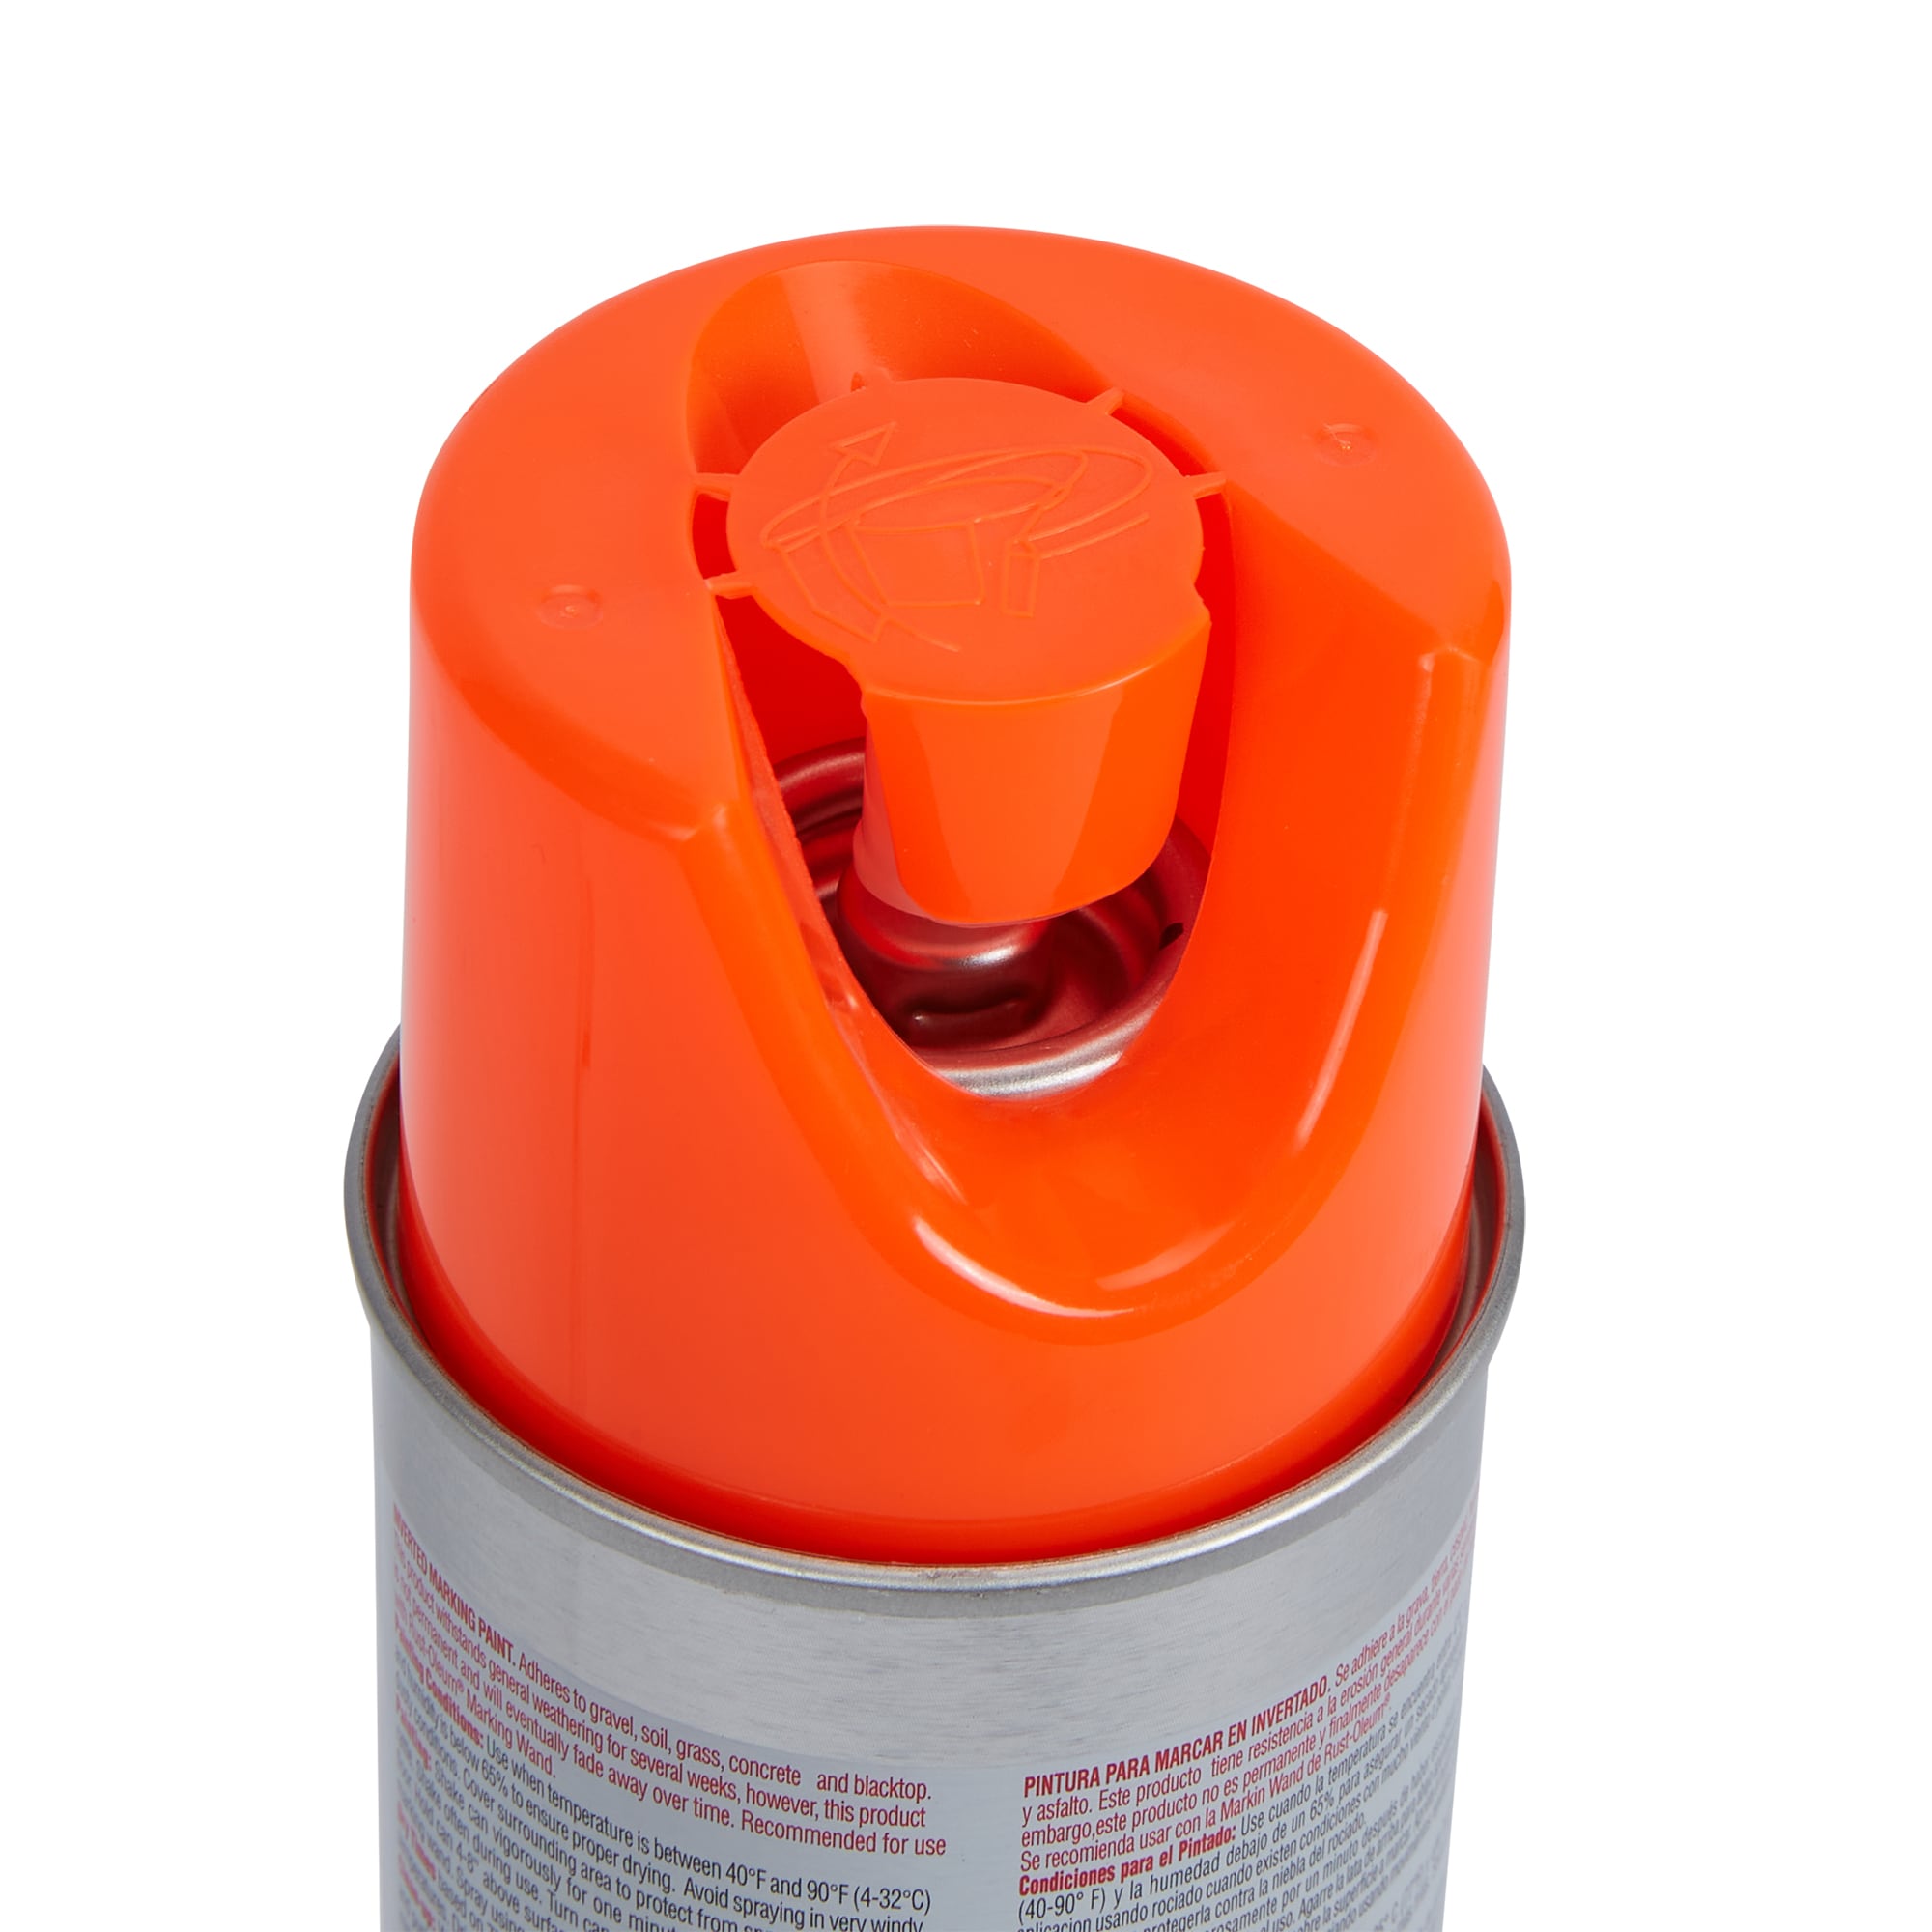 Rust-Oleum Professional High-visibility Yellow Water-based Marking Paint ( Spray Can) in the Marking Paint department at